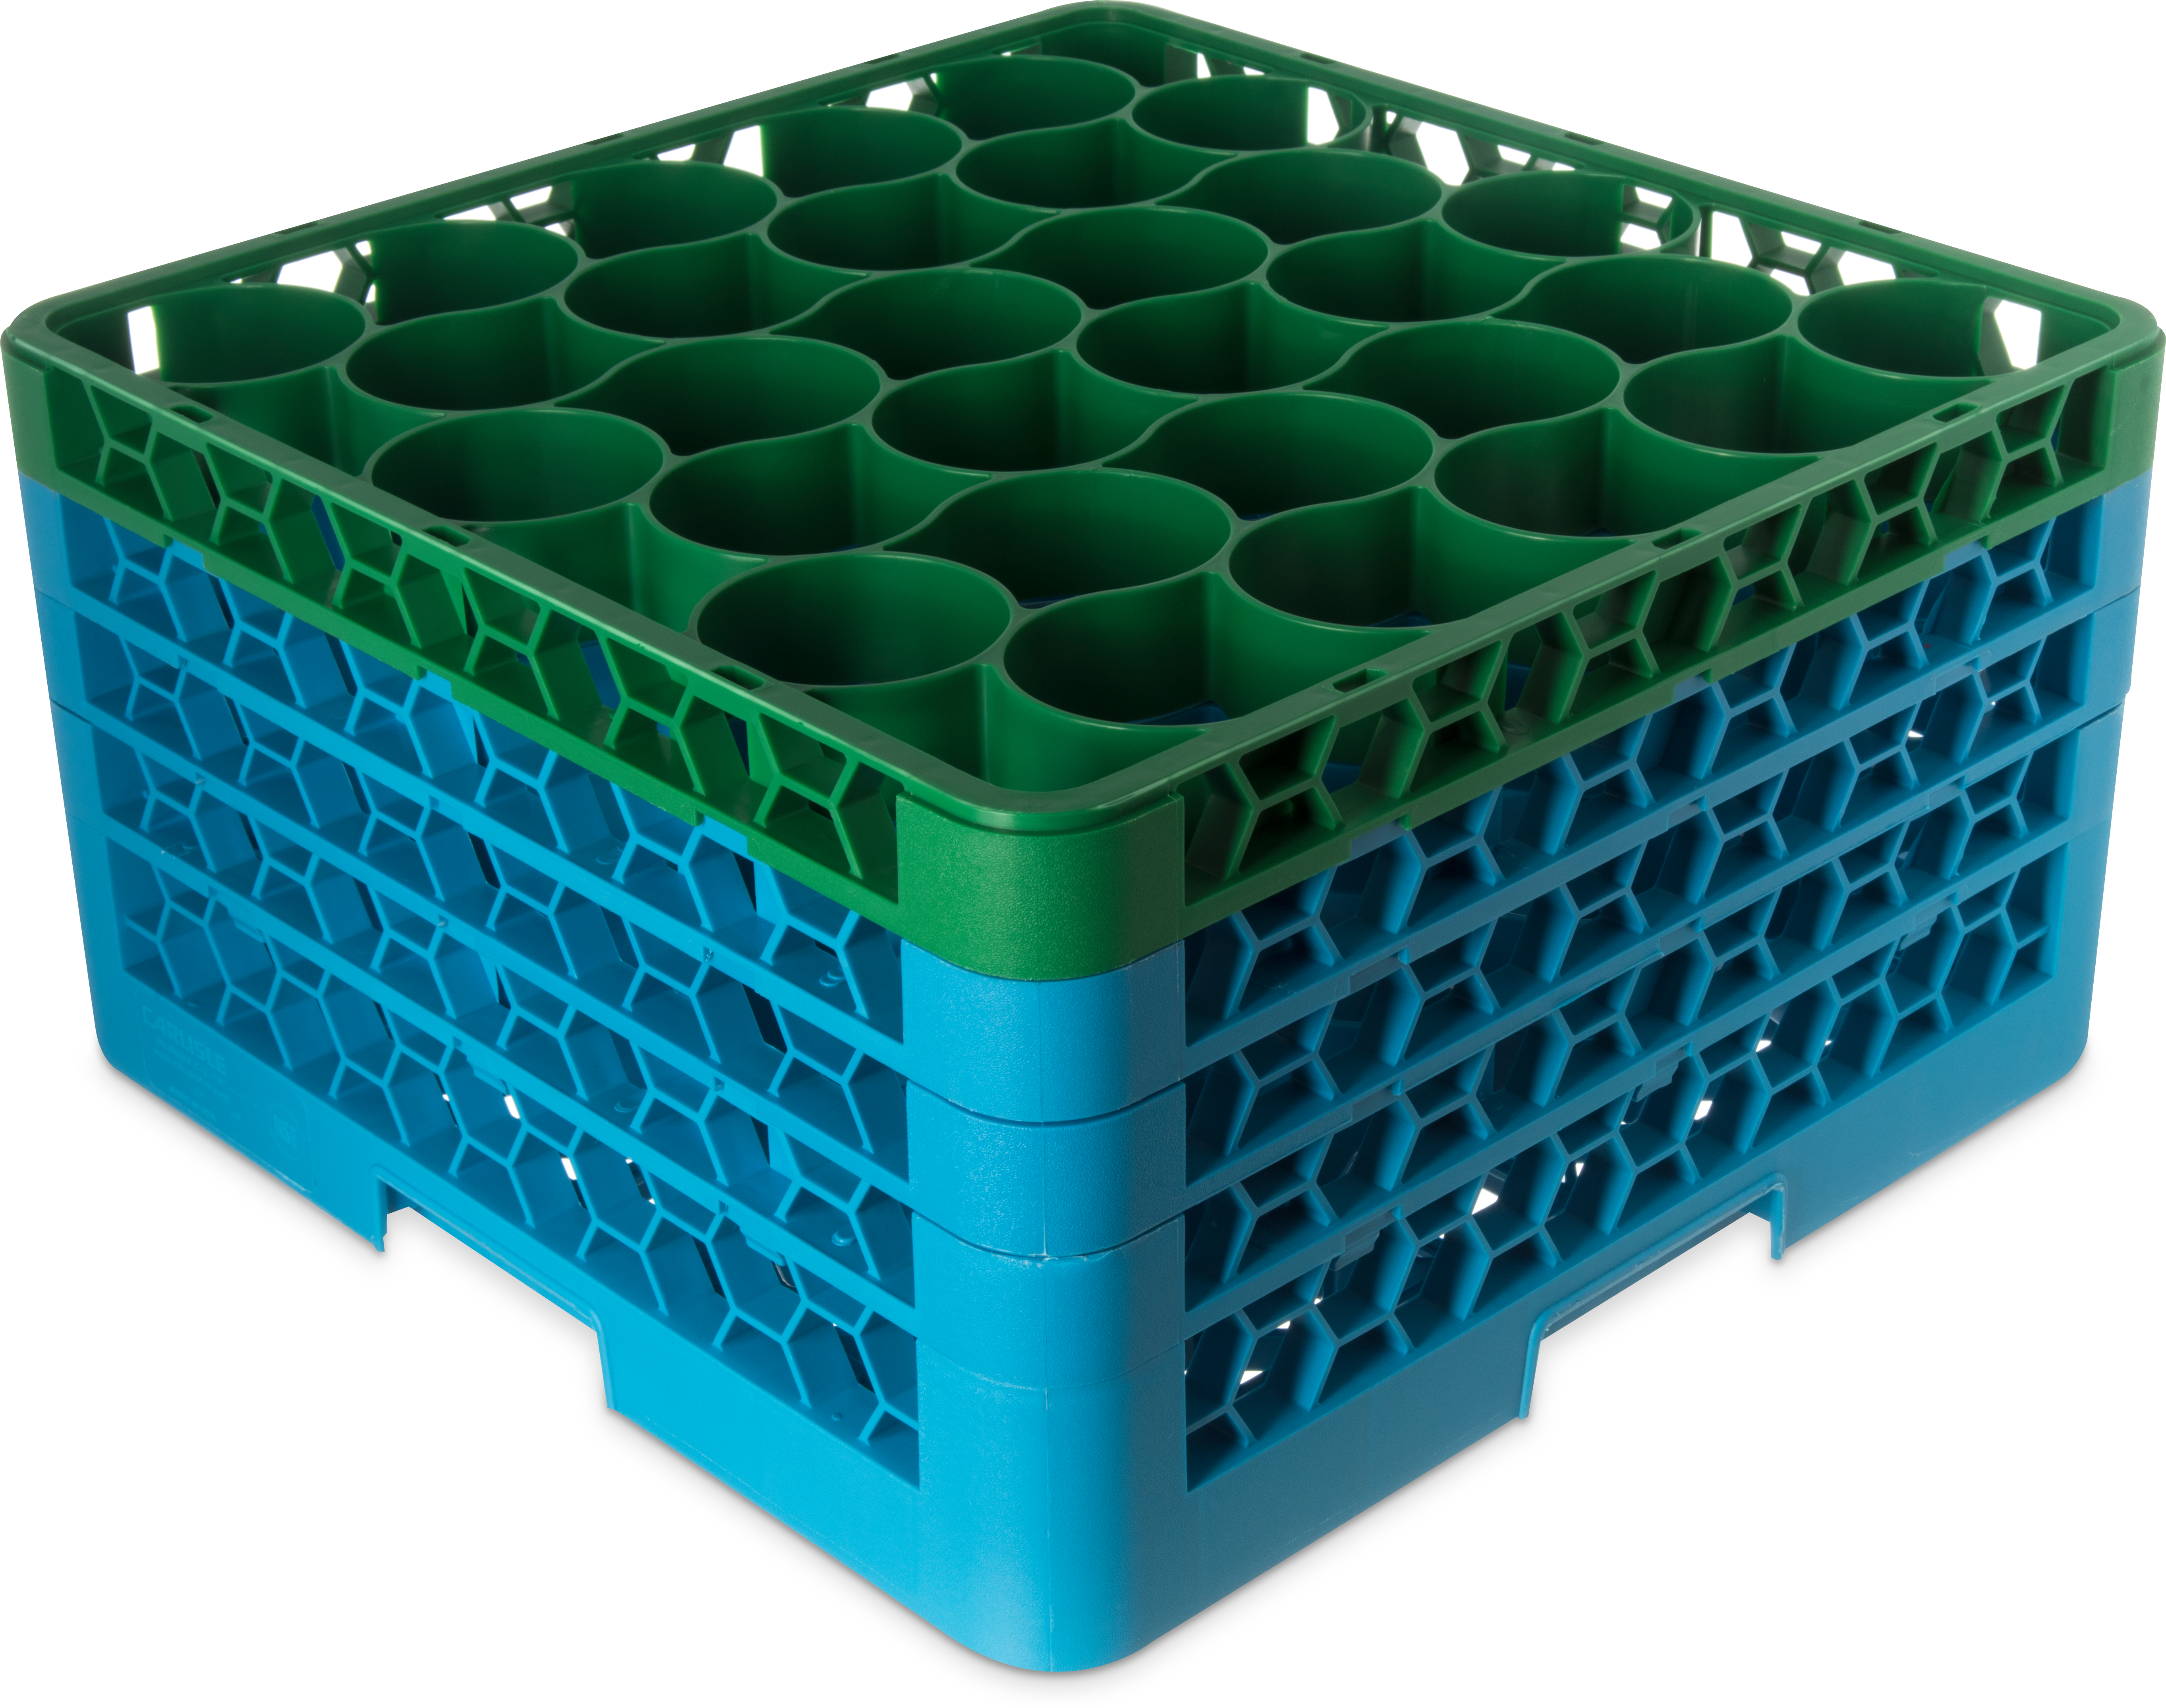 OptiClean NeWave Color-Coded Glass Rack with Three Extenders 30 Compartment (2pk) - Green-Carlisle Blue